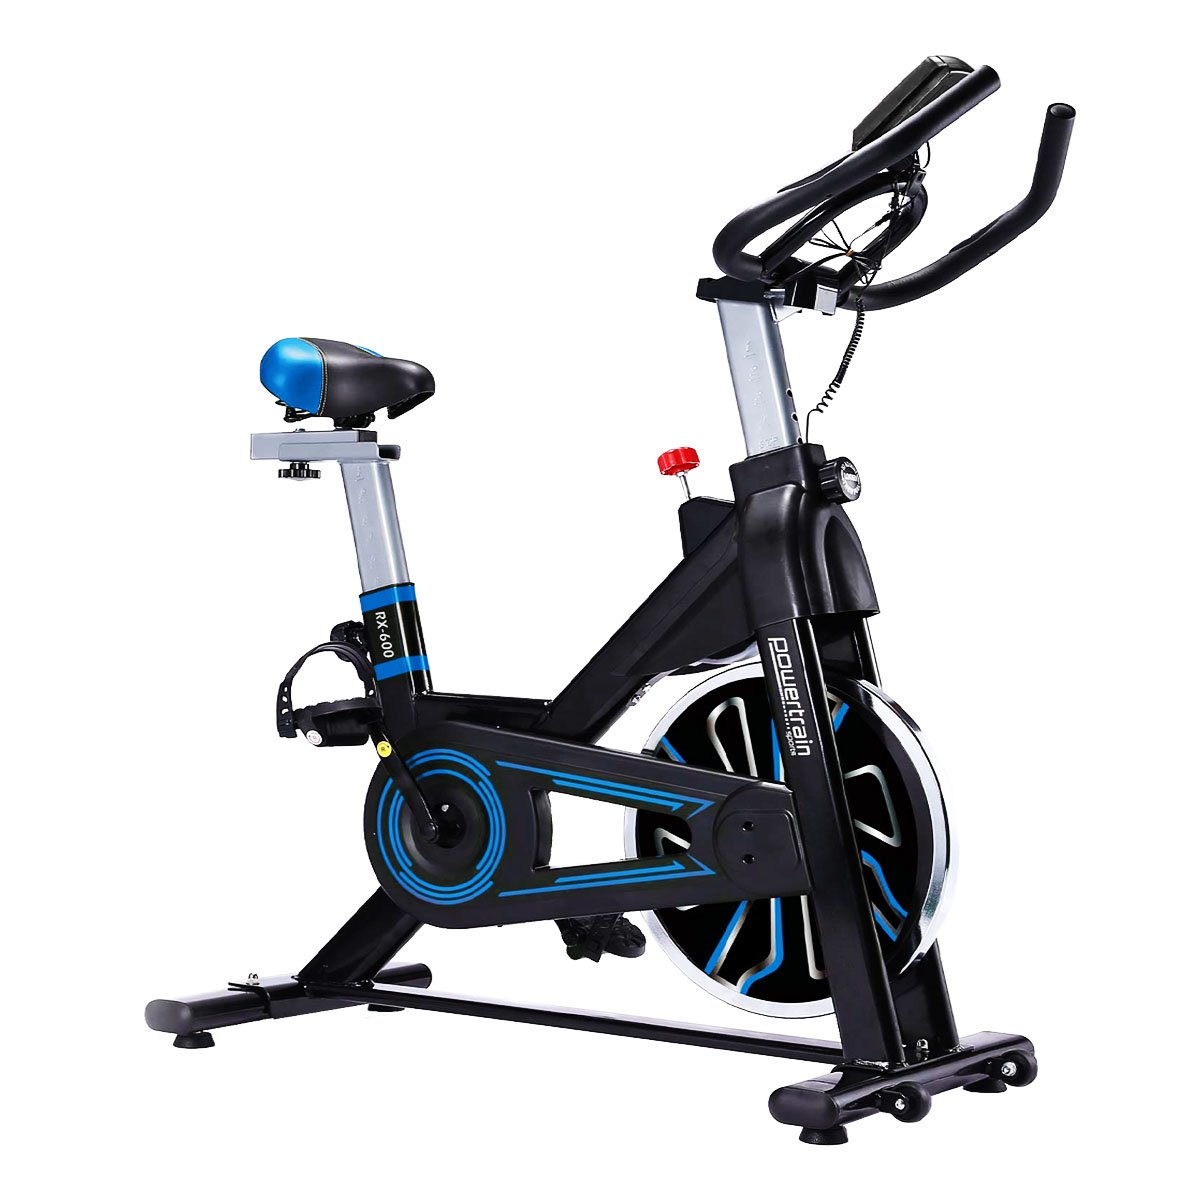 PowerTrain RX-600 Exercise Spin Bike Cardio Cycle - Blue - SILBERSHELL